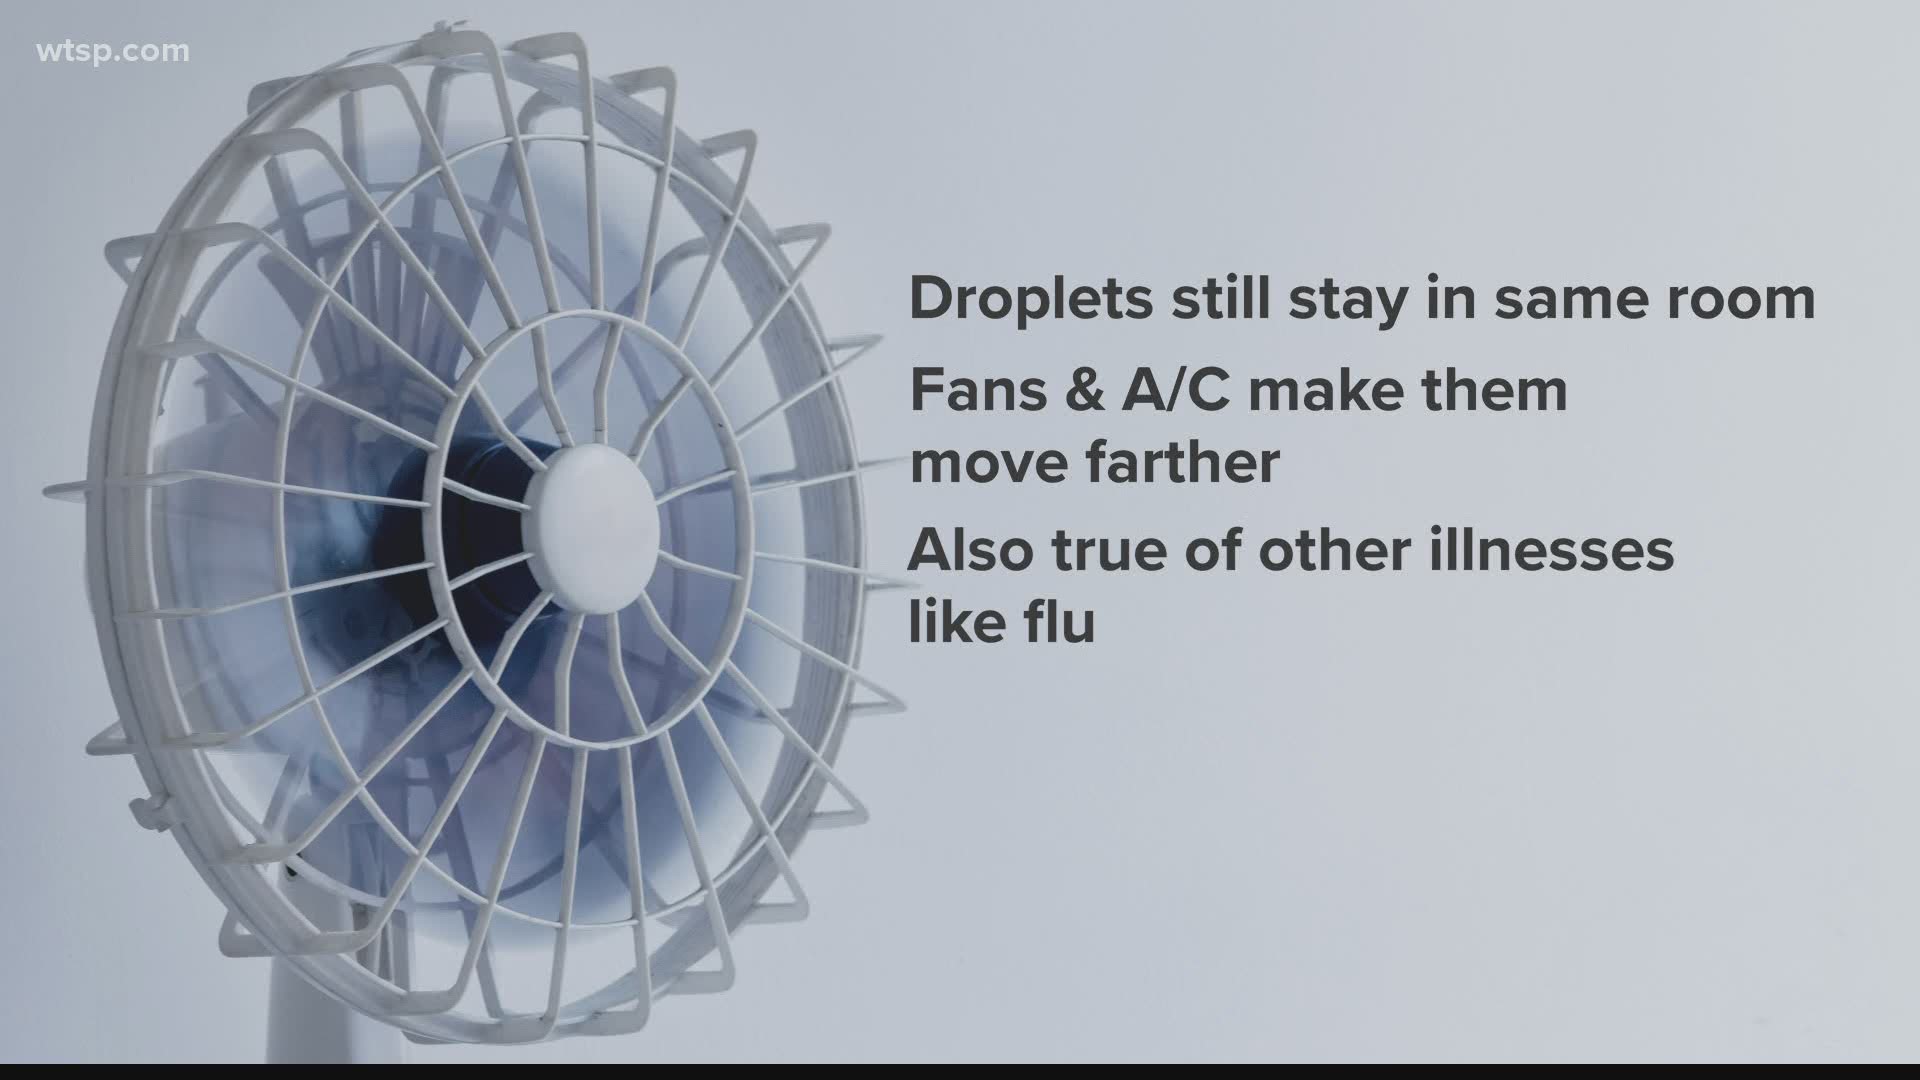 Experts say while the droplets that could be carrying COVID-19 stay in the same room, fans and A/C make them move farther.